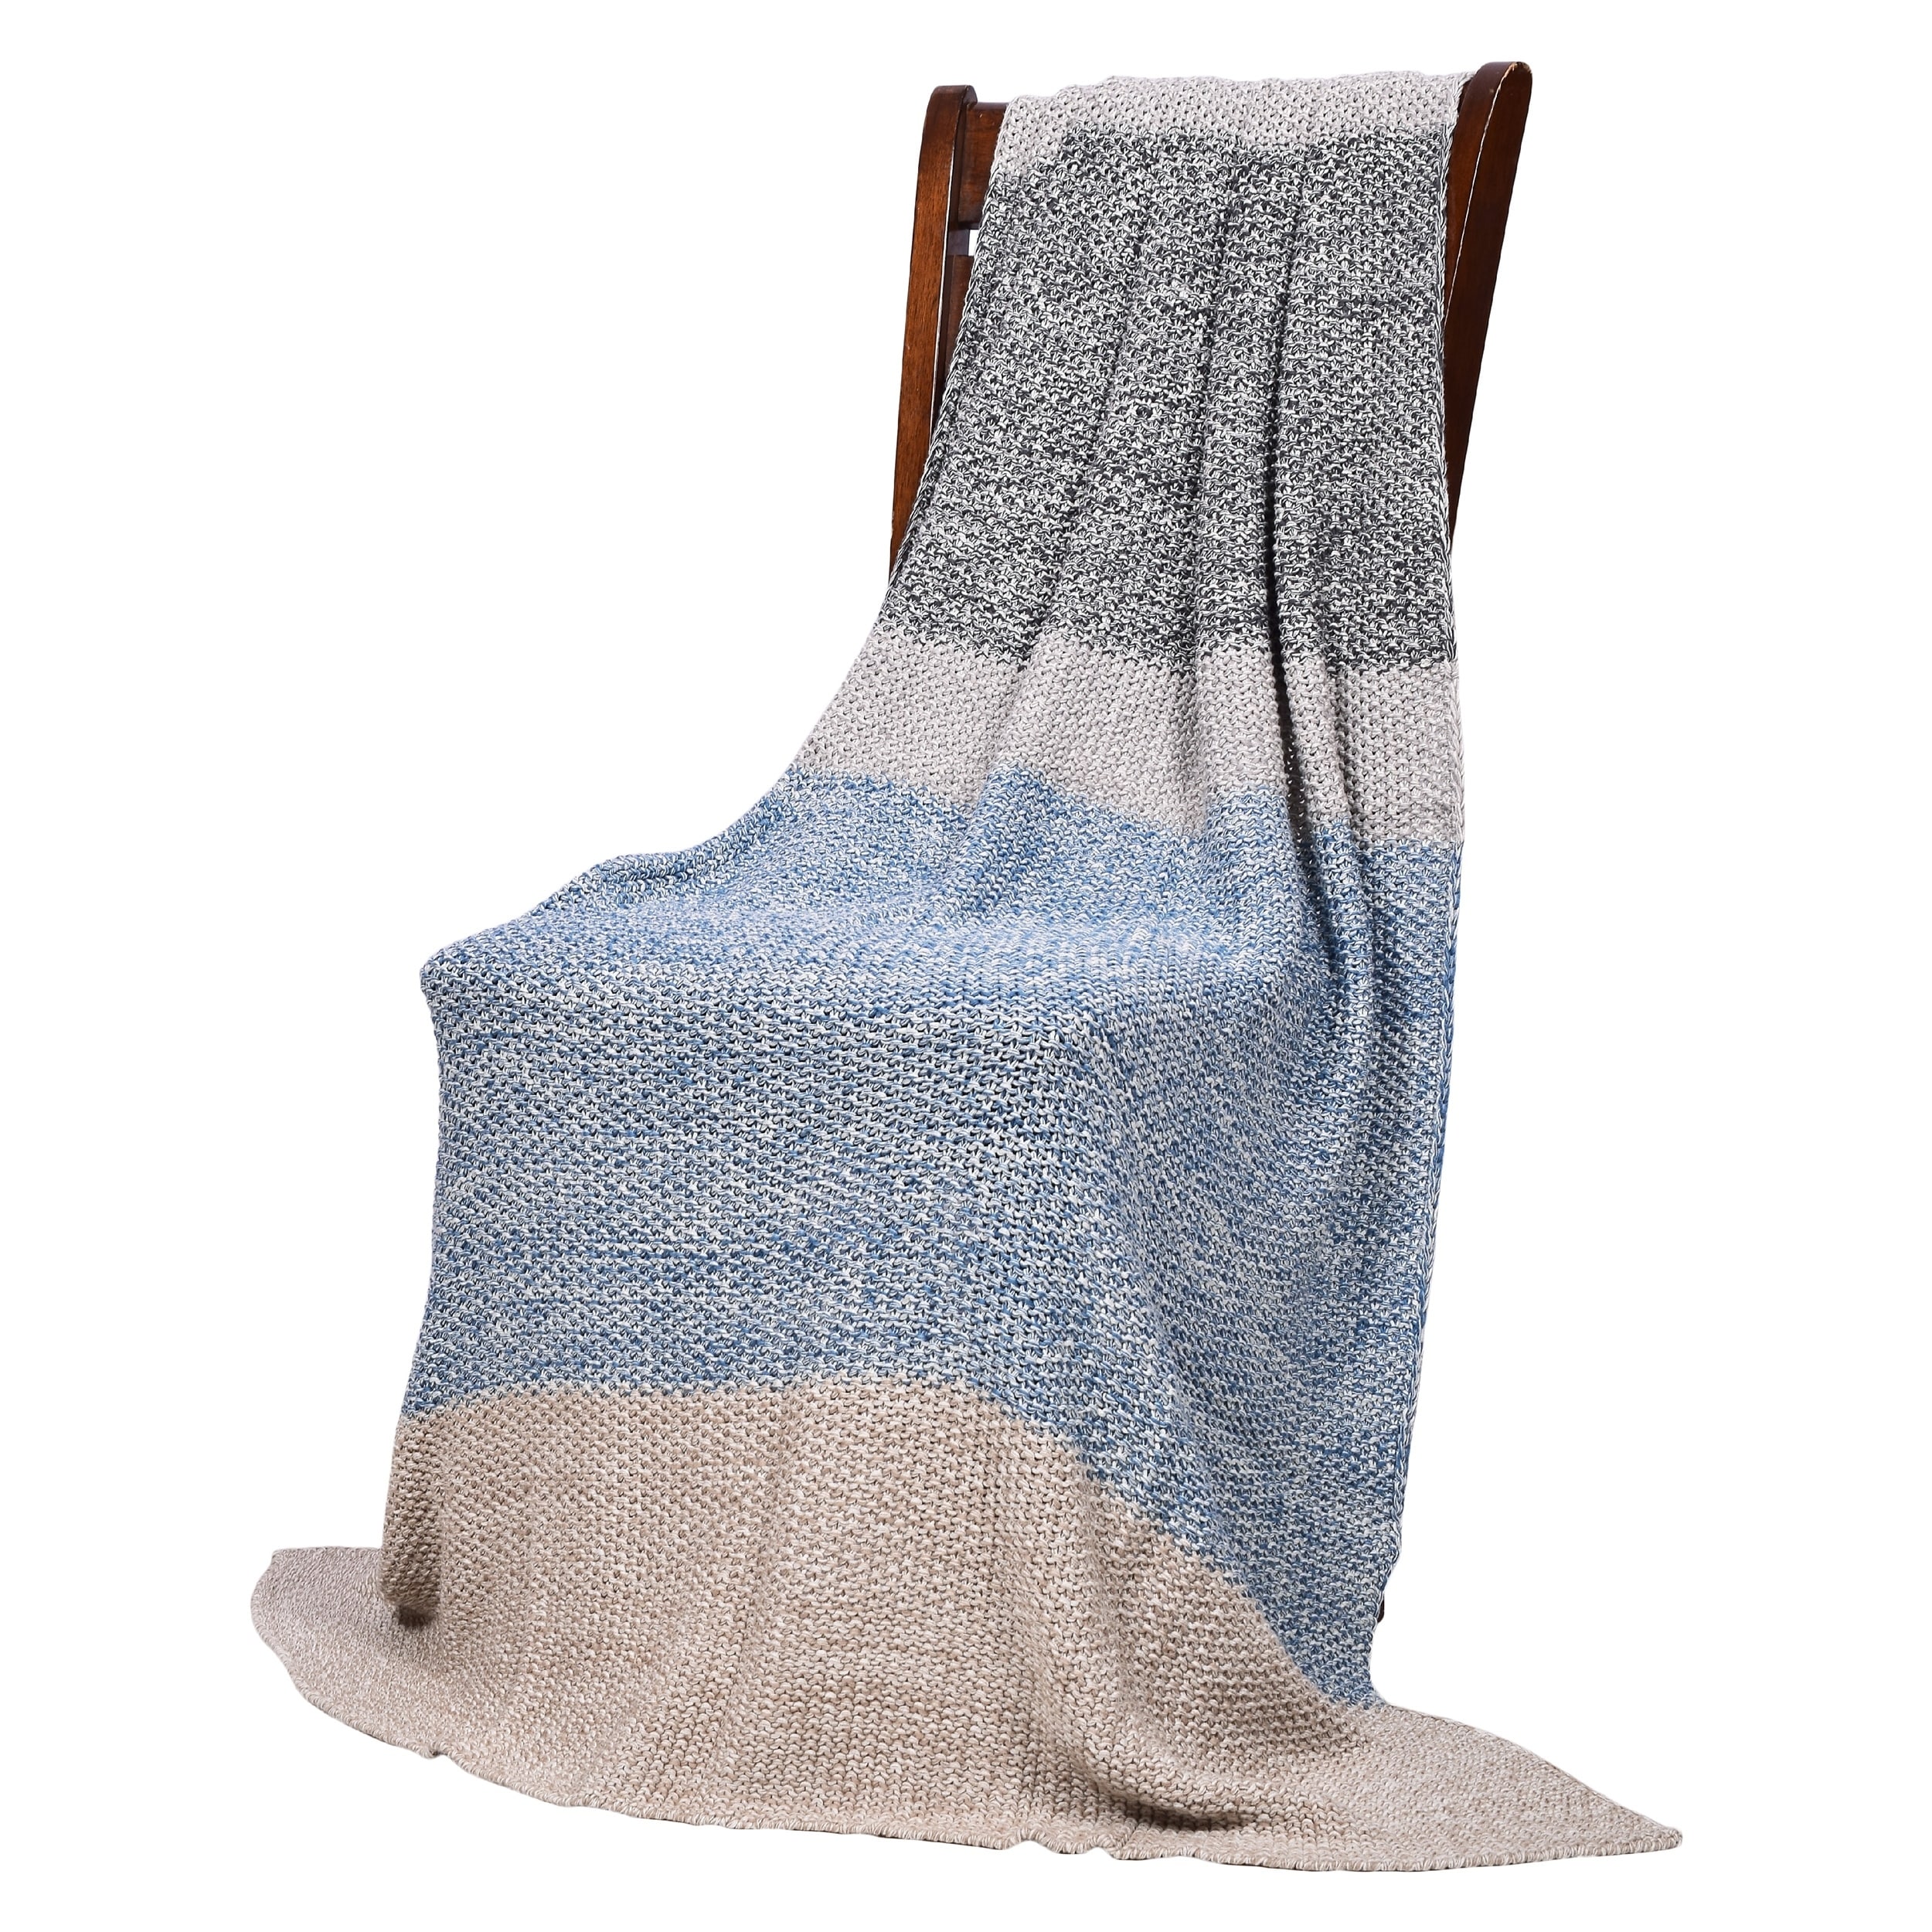 cotton throw blanket made in usa